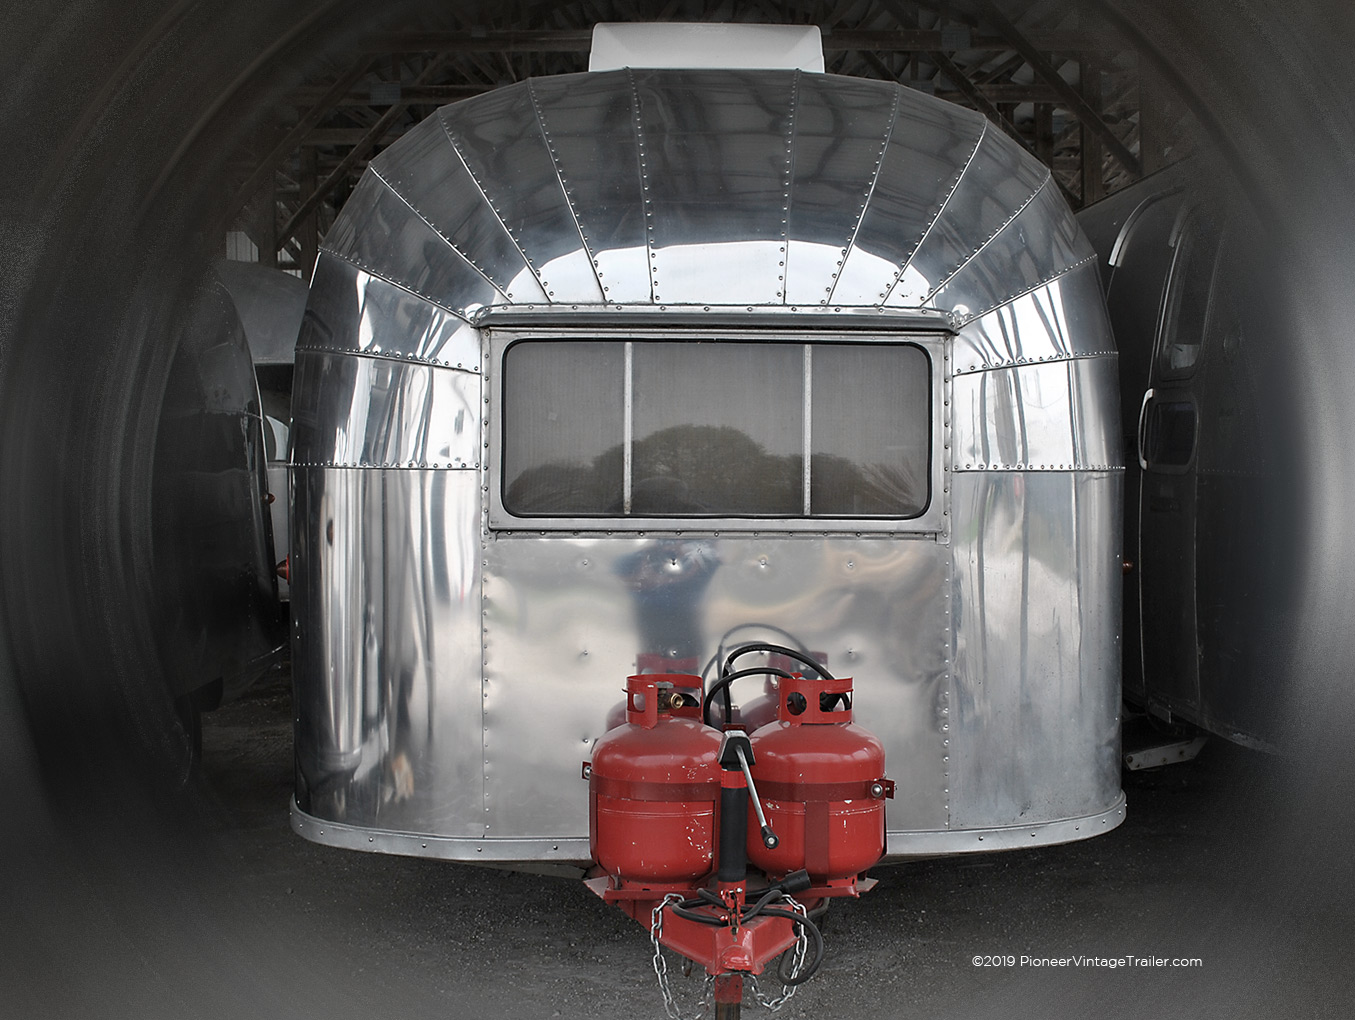 1954 Airstream Wanderer whale tail